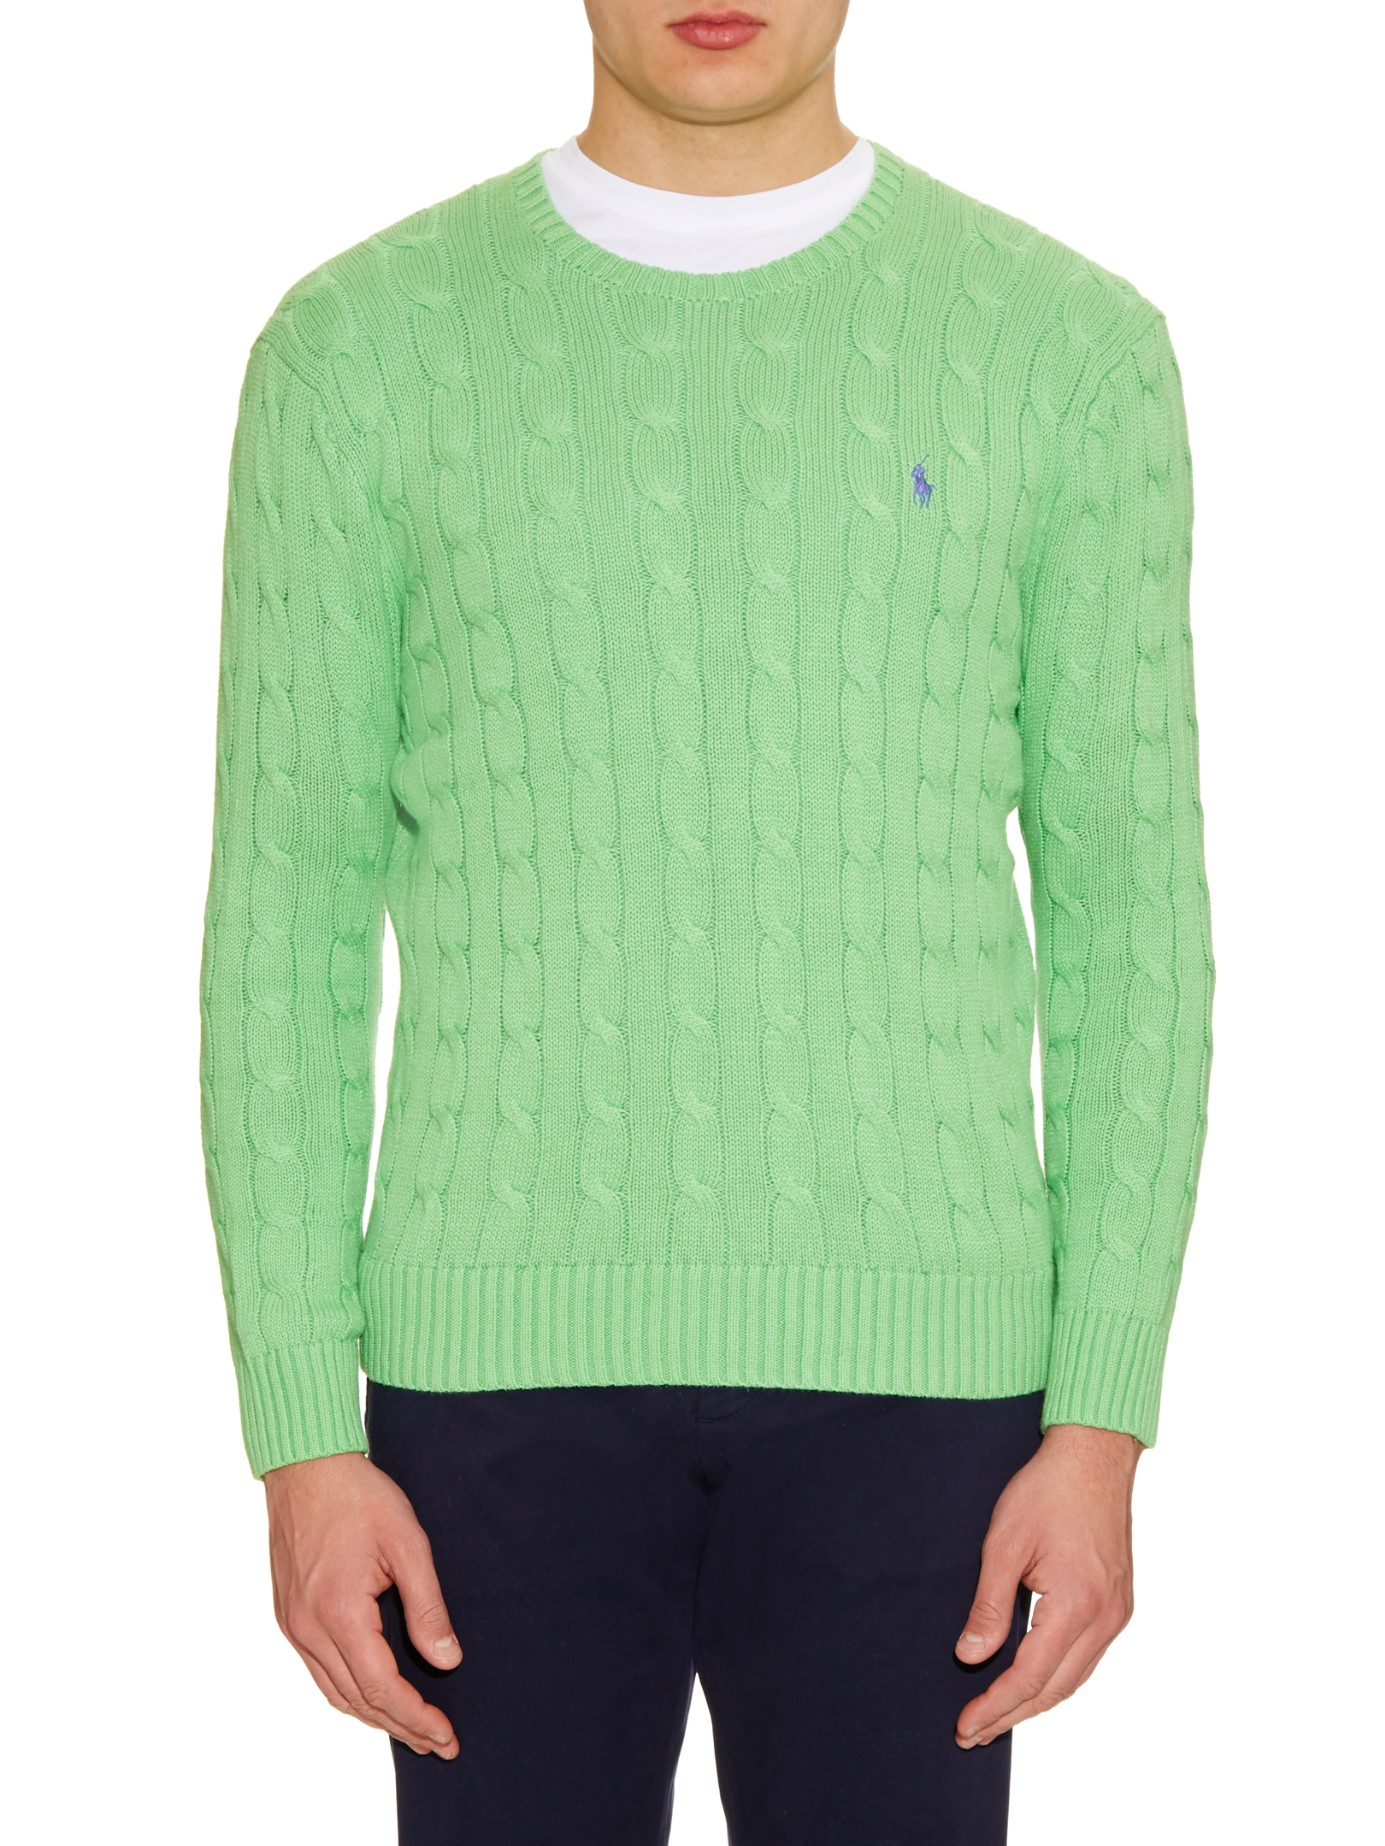 Lyst - Polo ralph lauren Cable-knit Cotton Sweater in Green for Men